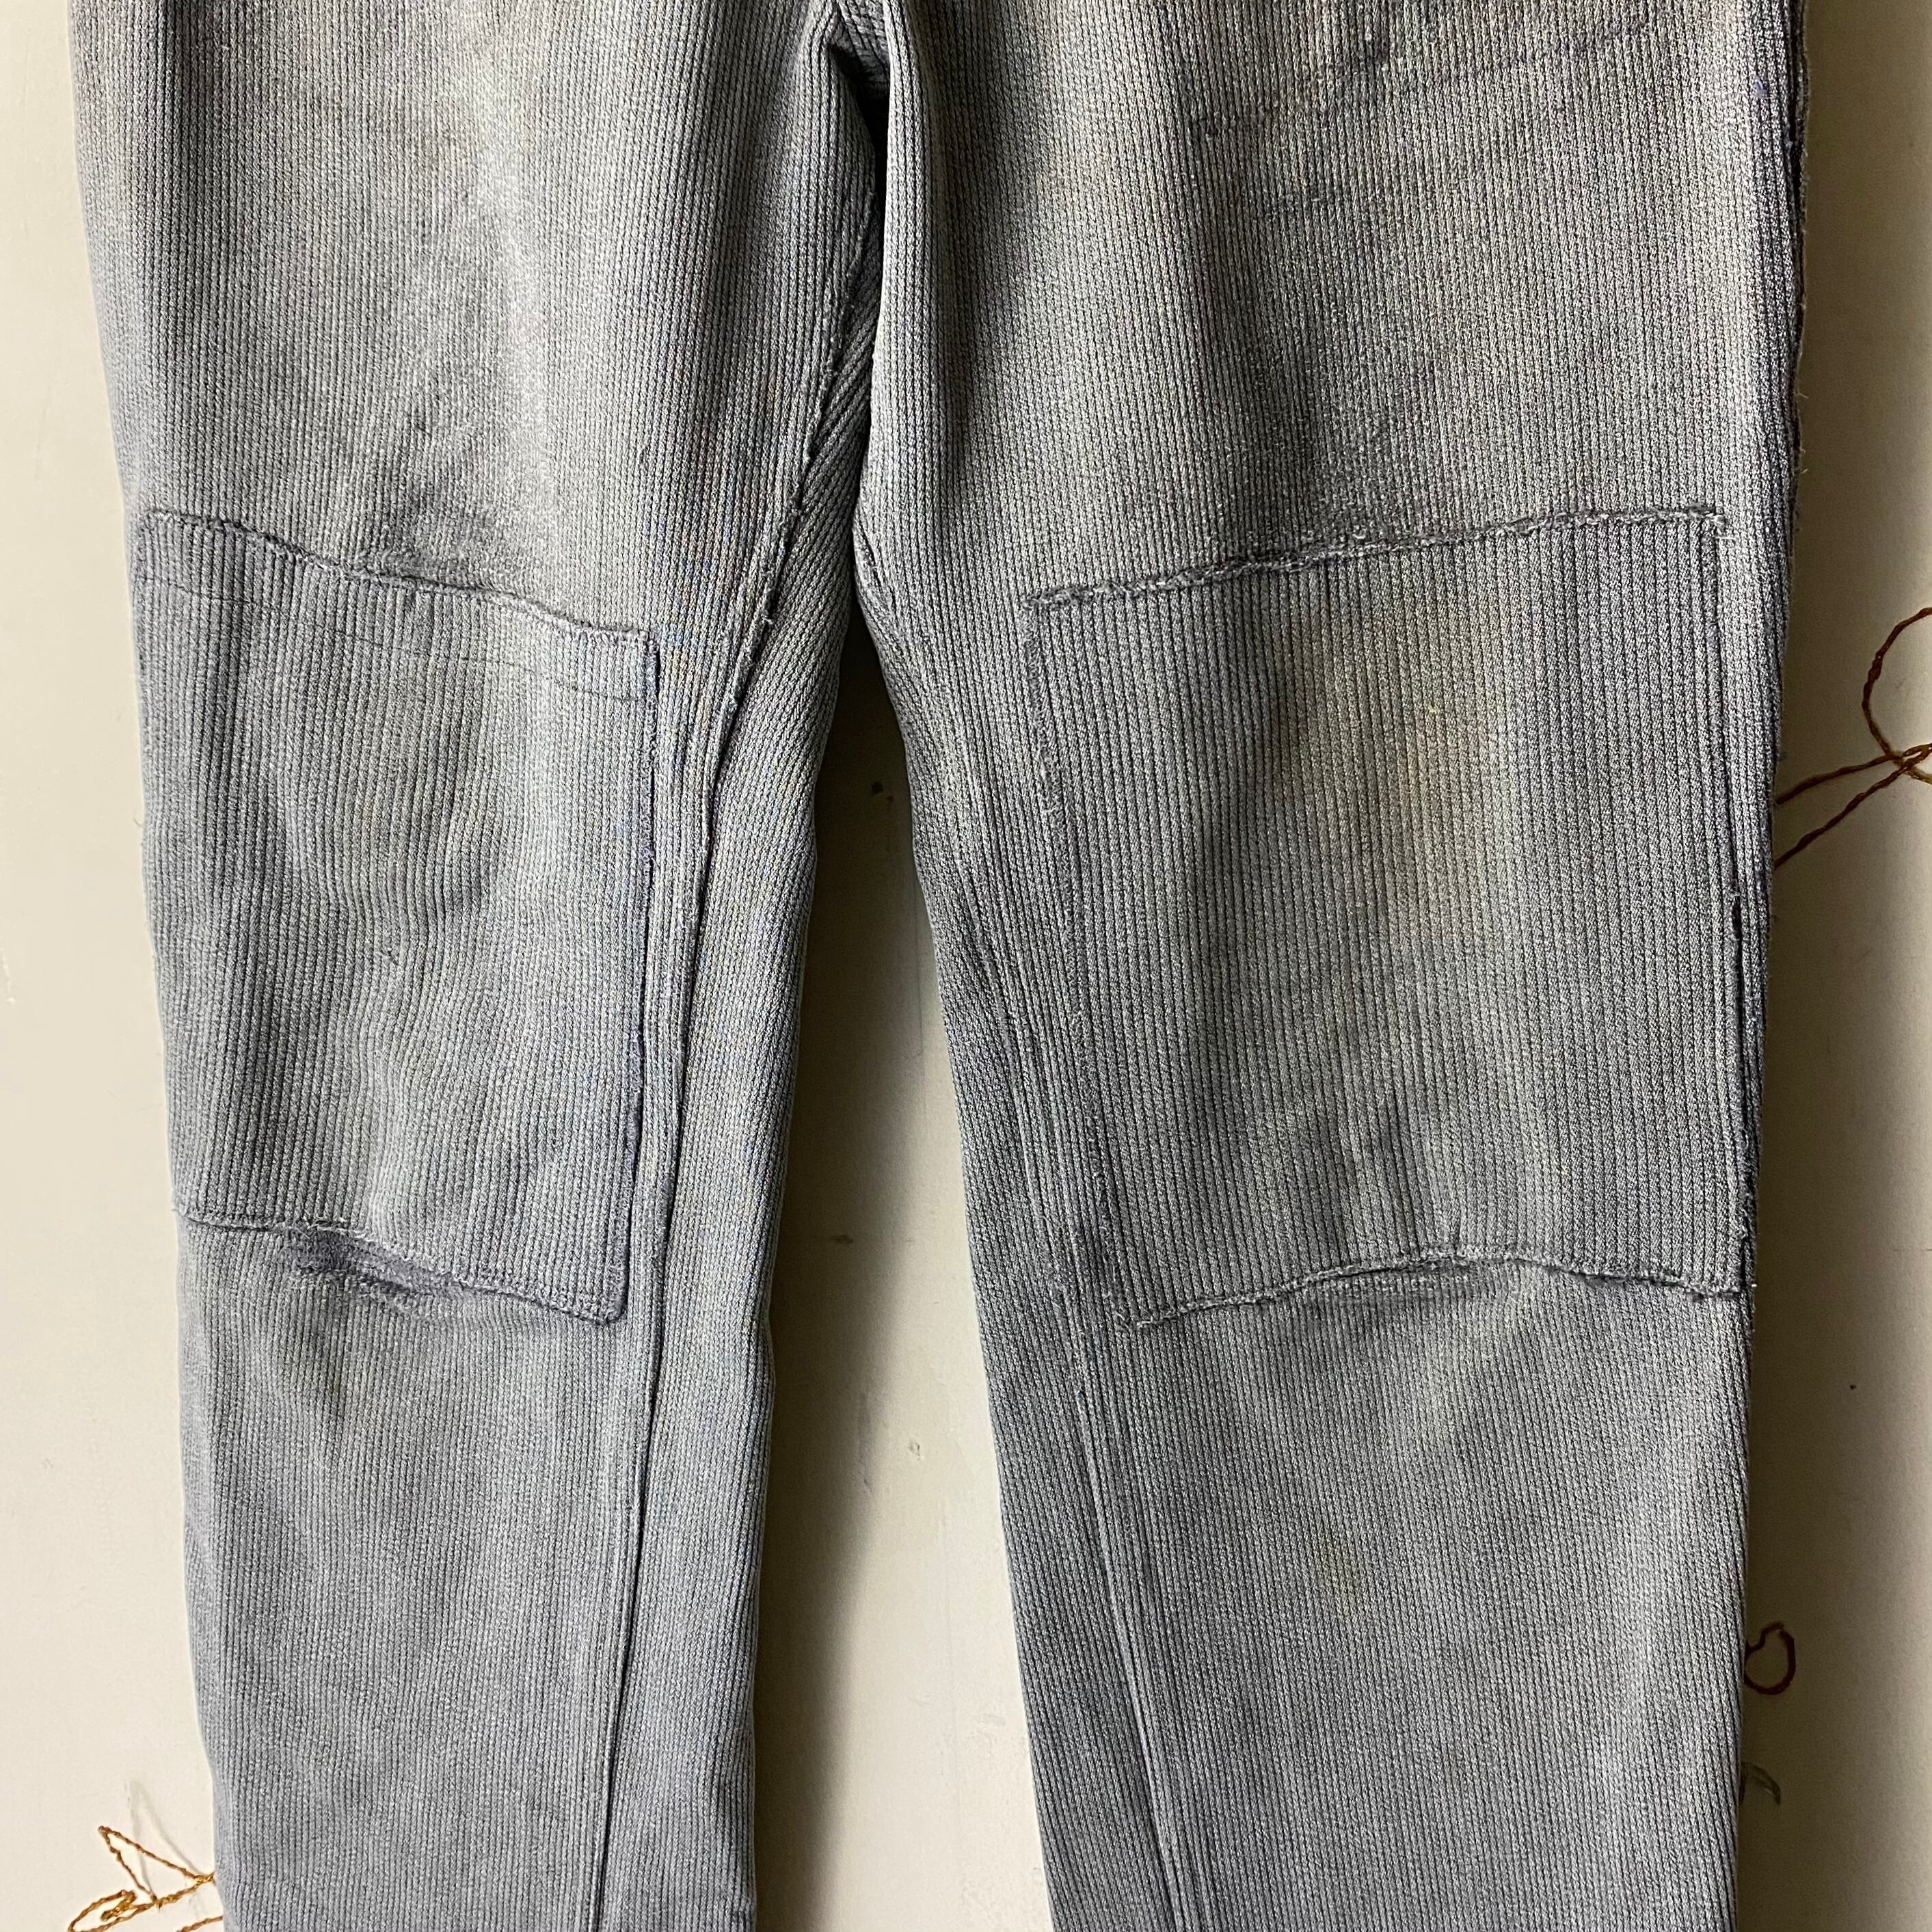 vintage 1950’s french cotton pique work pants | NOIR ONLINE powered by BASE